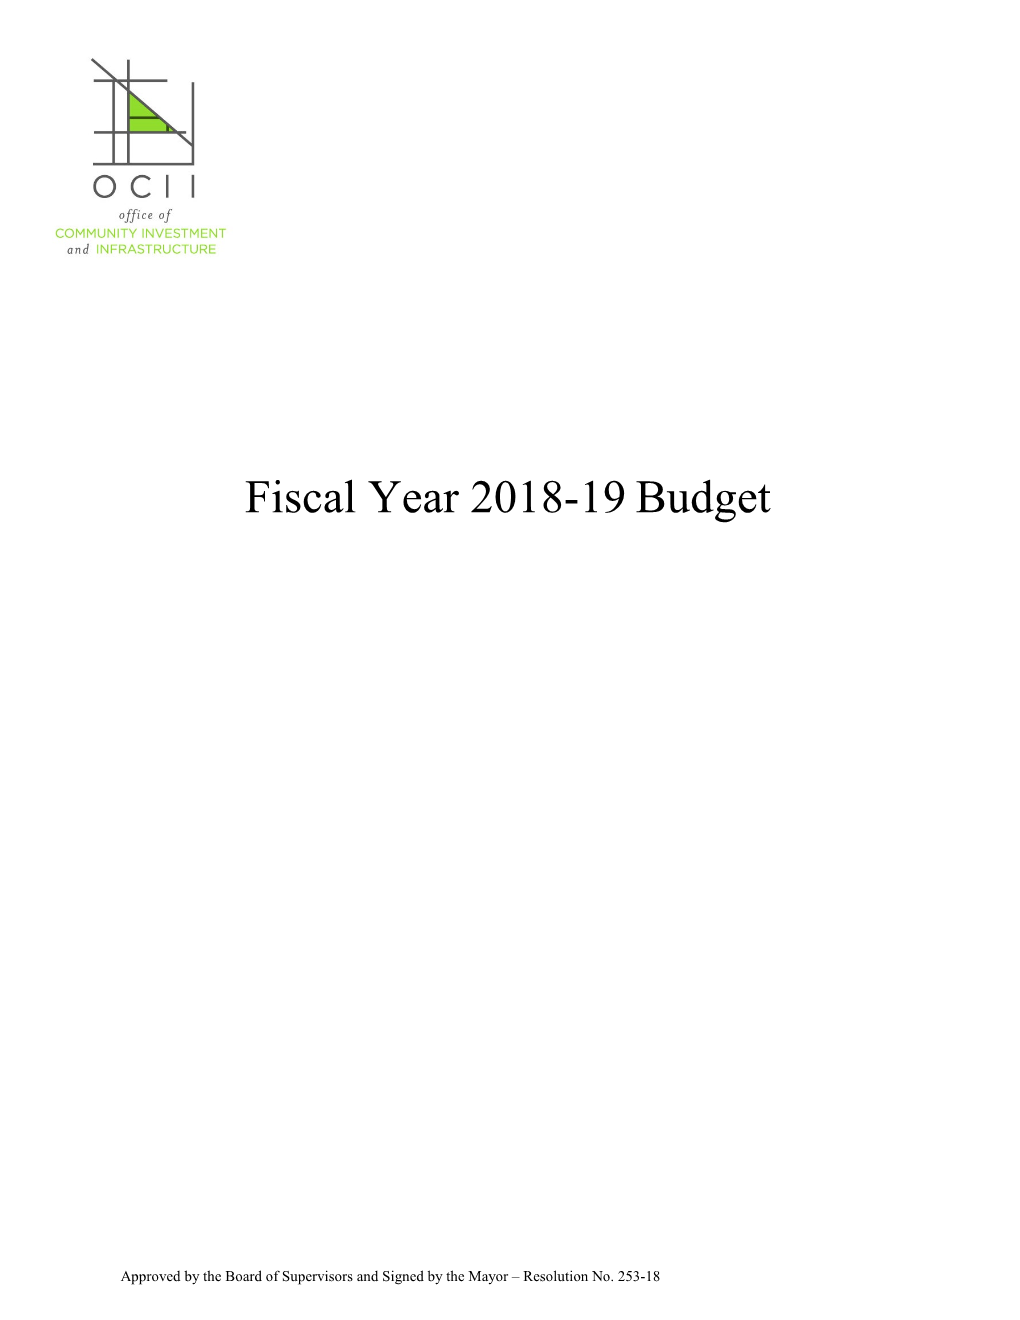 Fiscal Year 2018-19 Budget